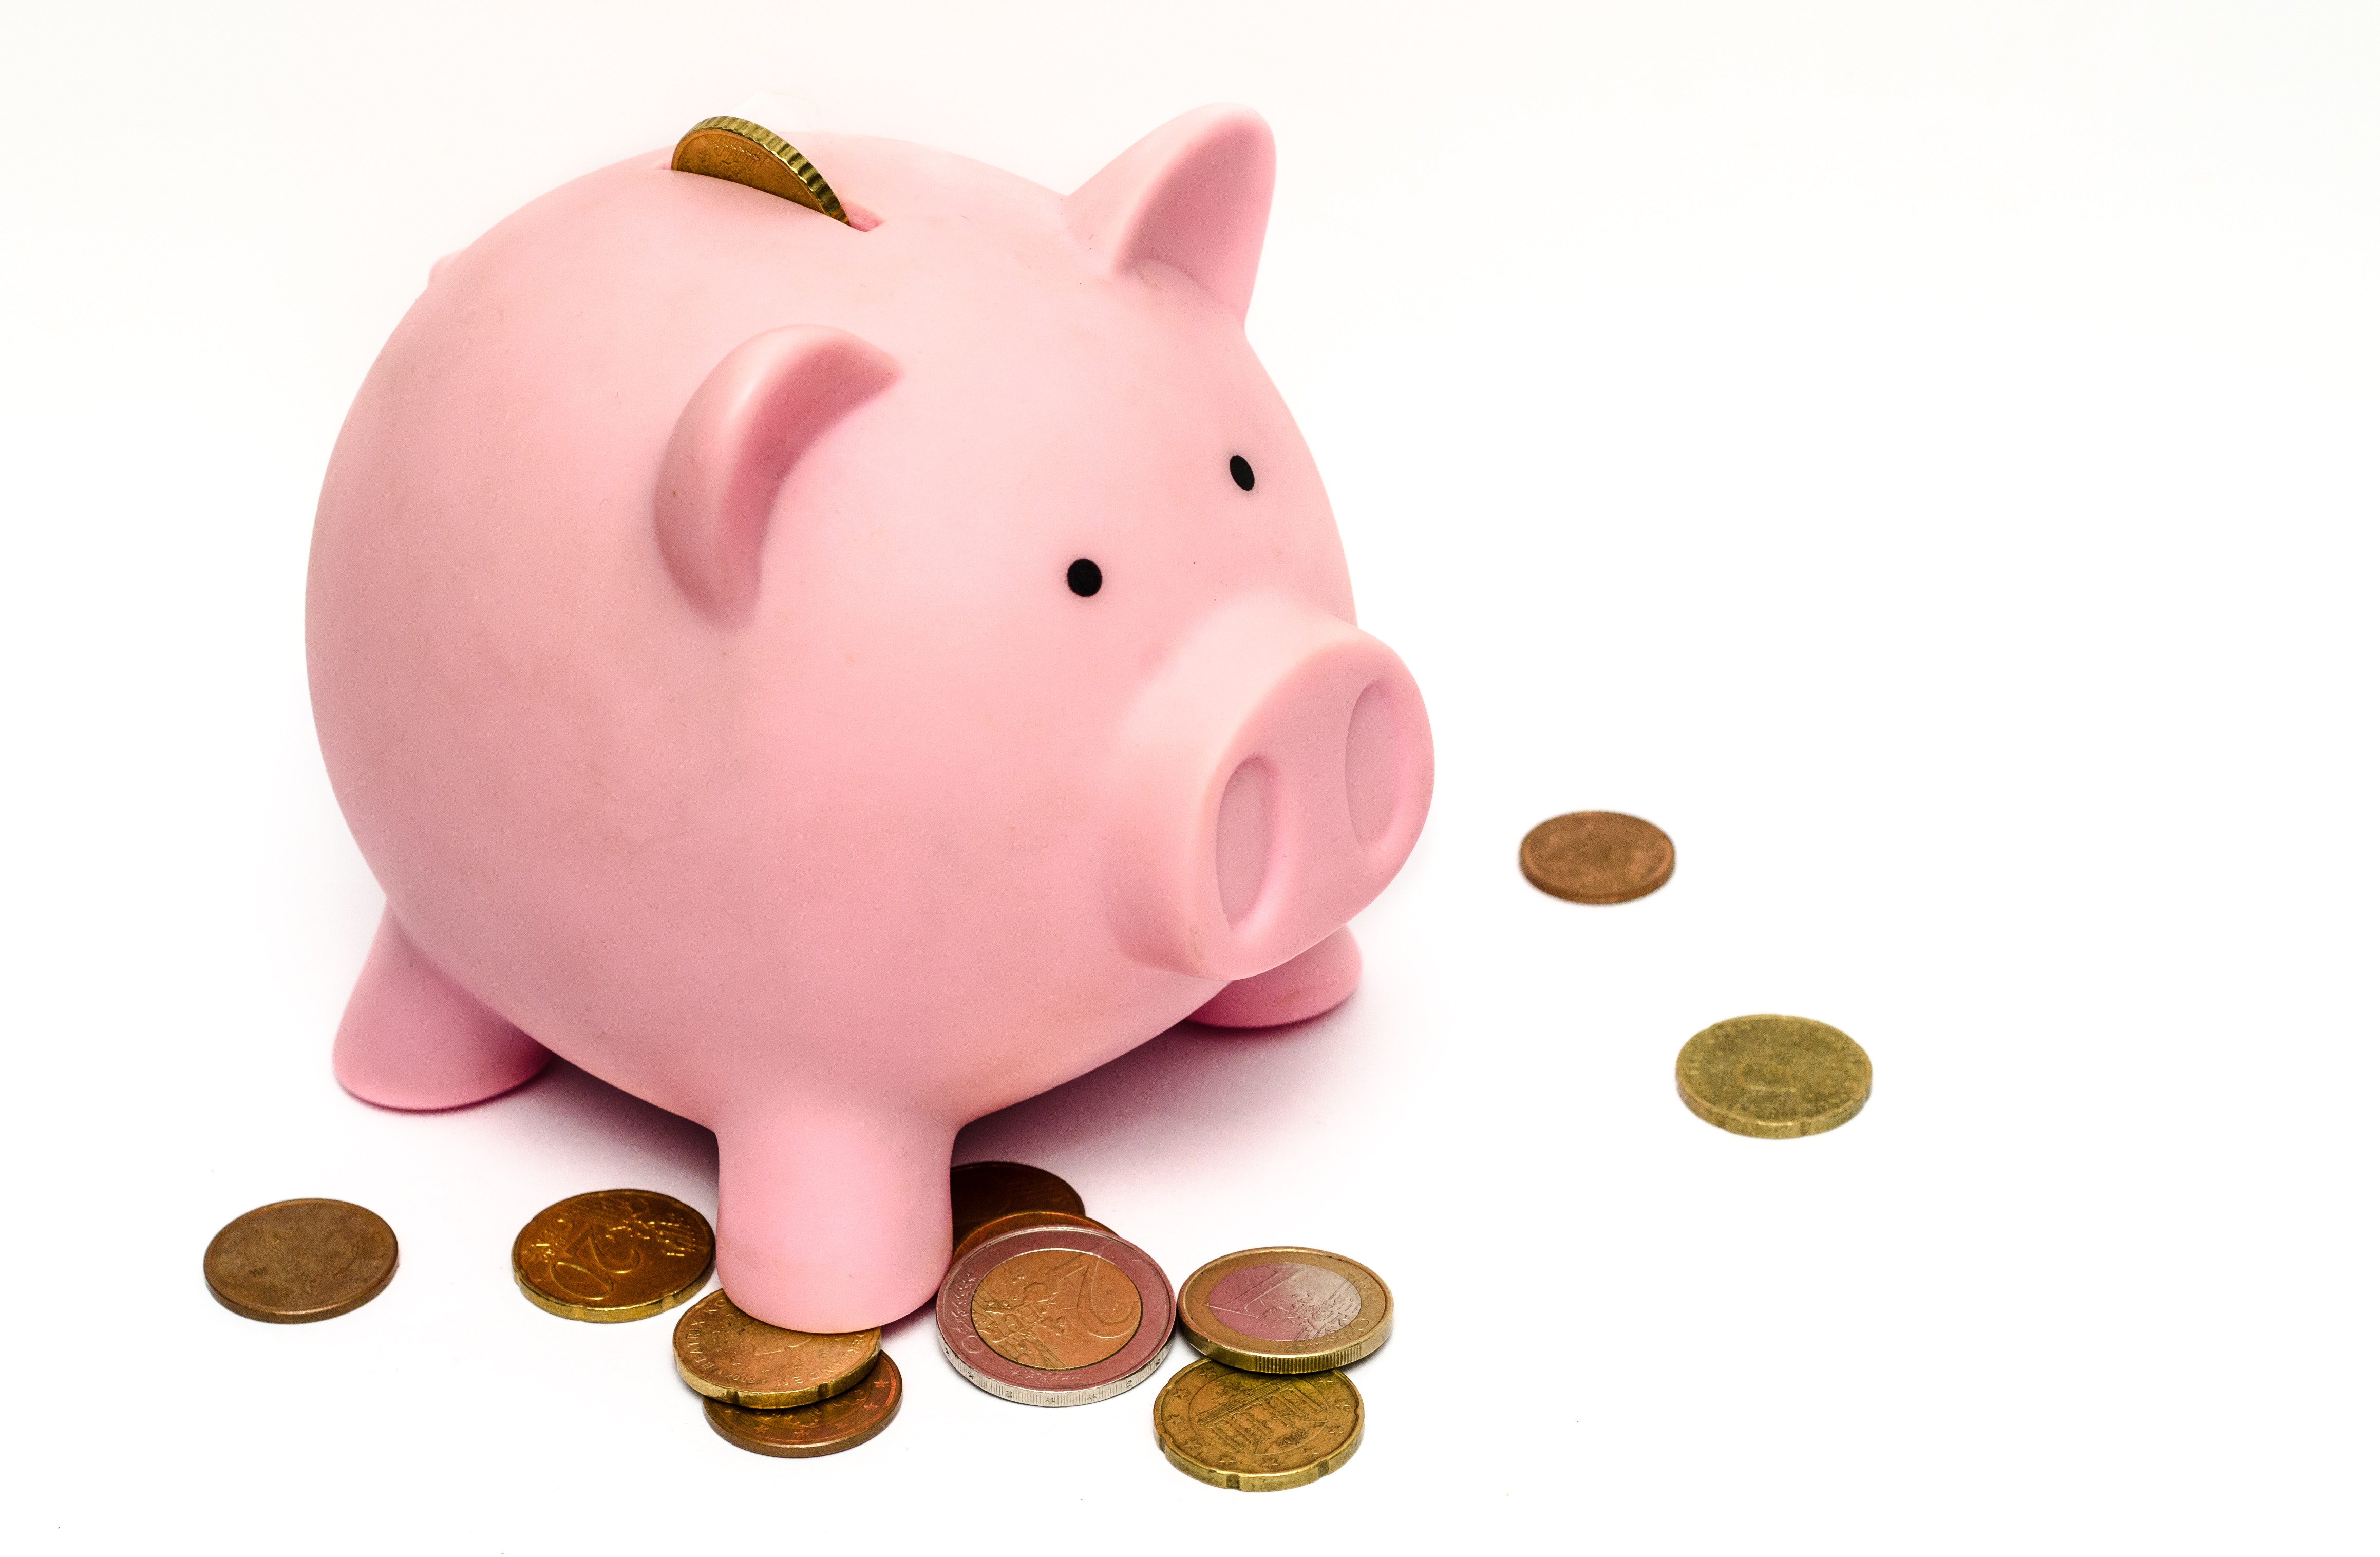 Is Your RSO Looking to Fill Its Piggy Bank?